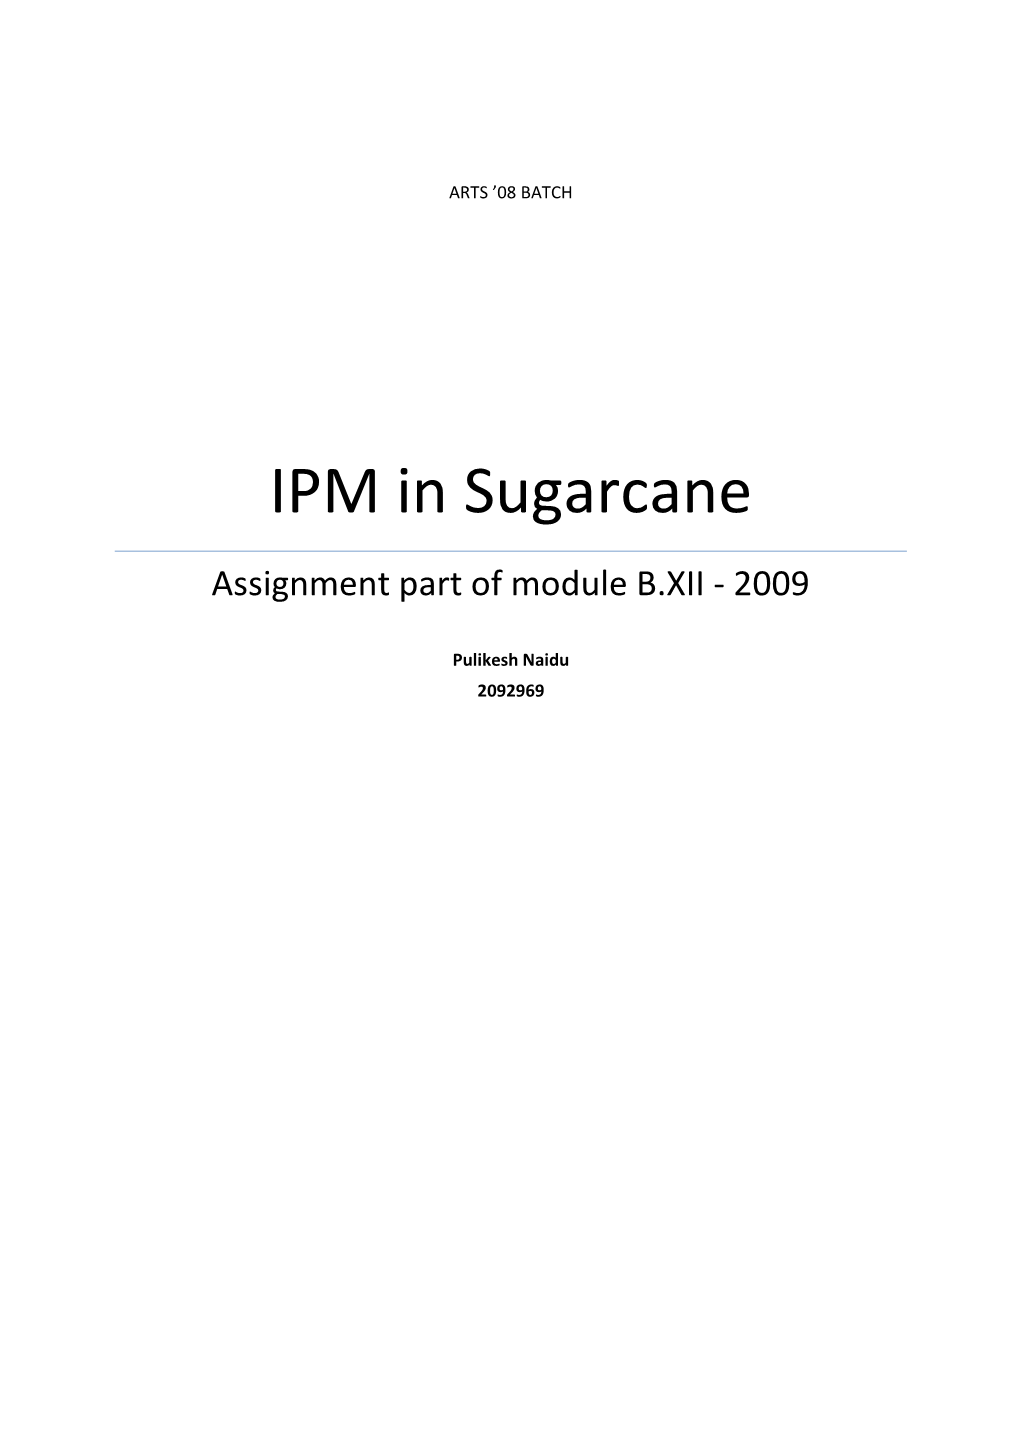 IPM in Sugarcane Assignment Part of Module B.XII - 2009